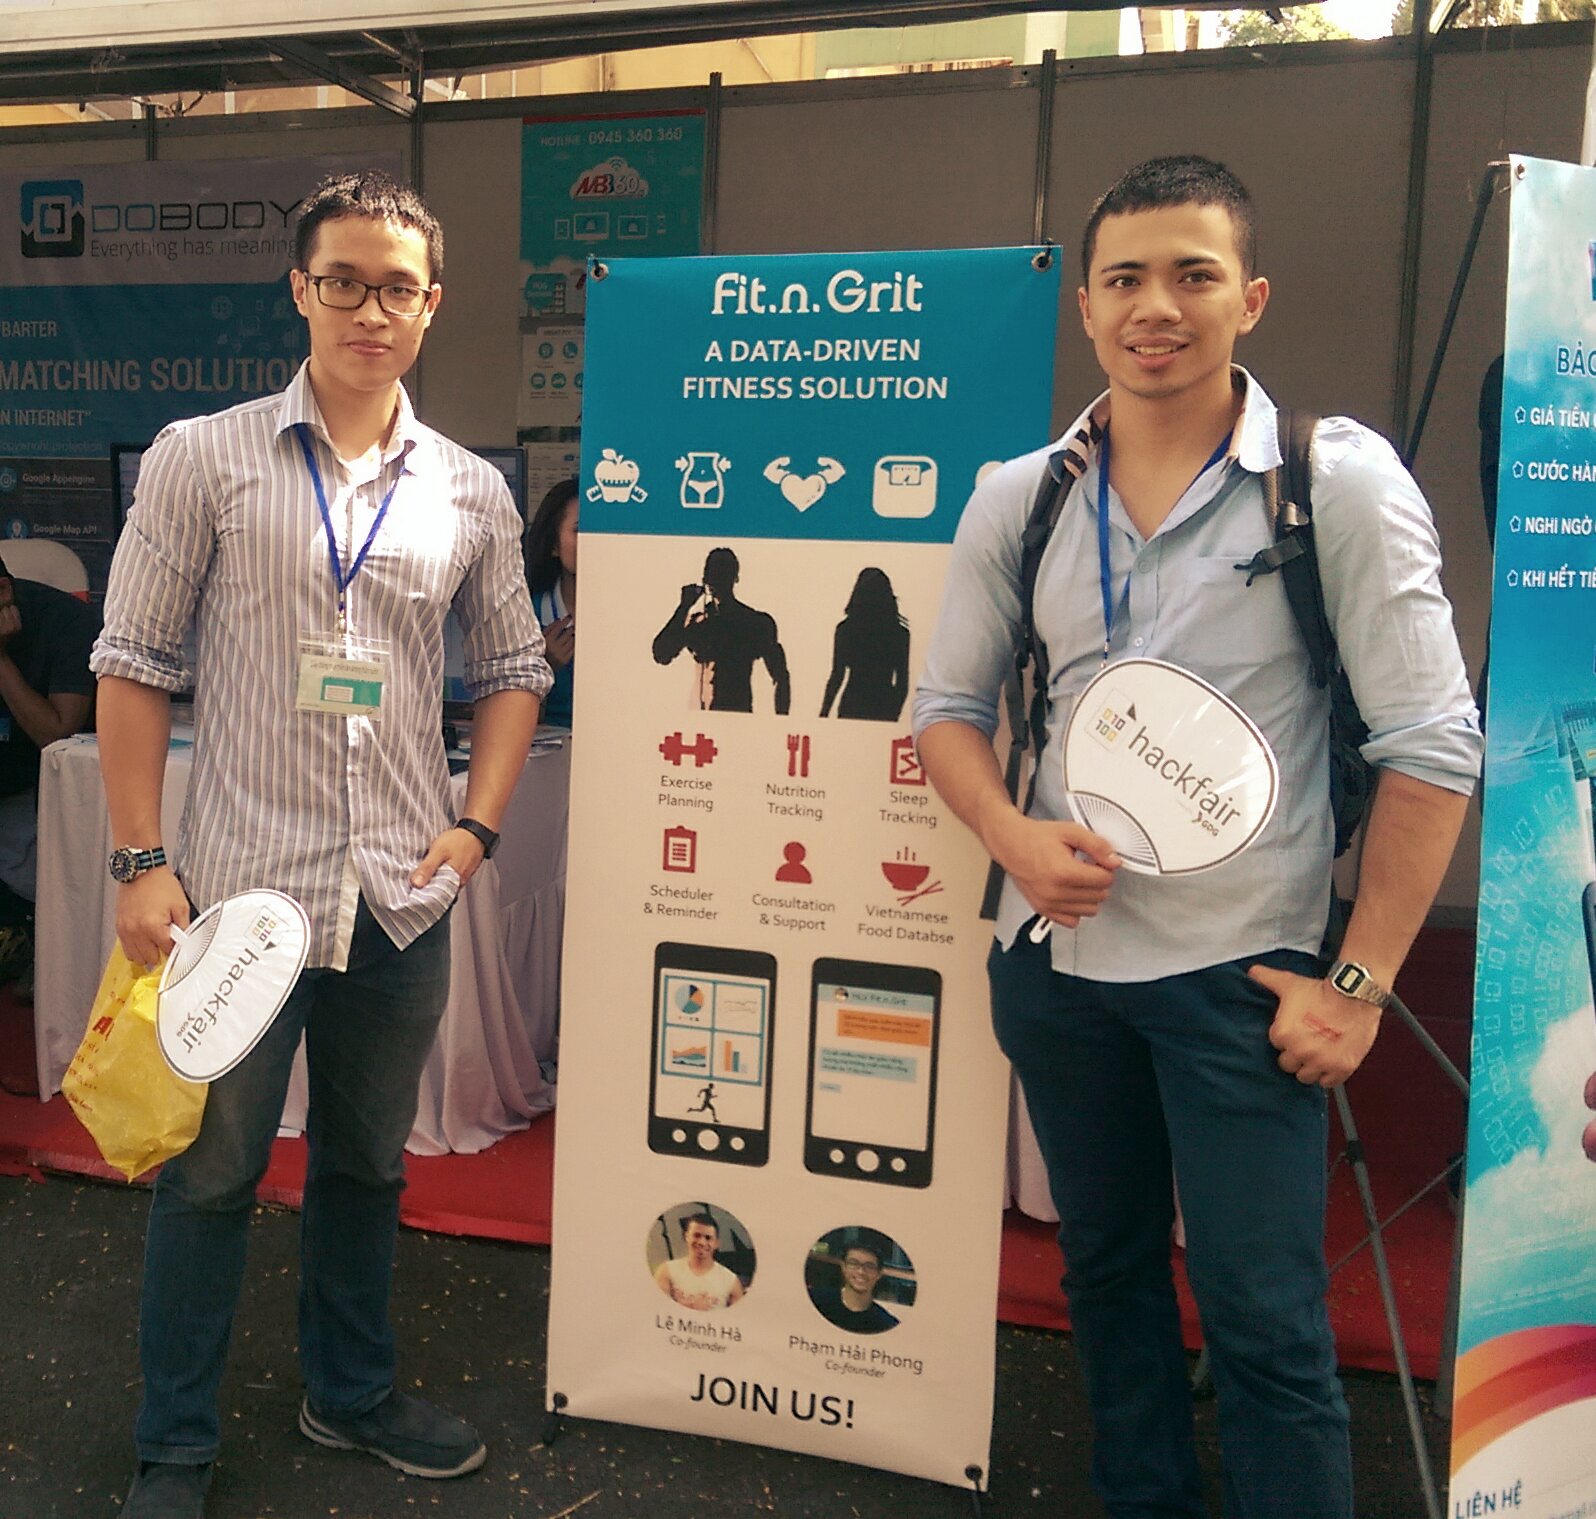 Pham Hai Phong (left) and his business partner Le Minh Ha co-founded the mobile application Fit.n.Grit.